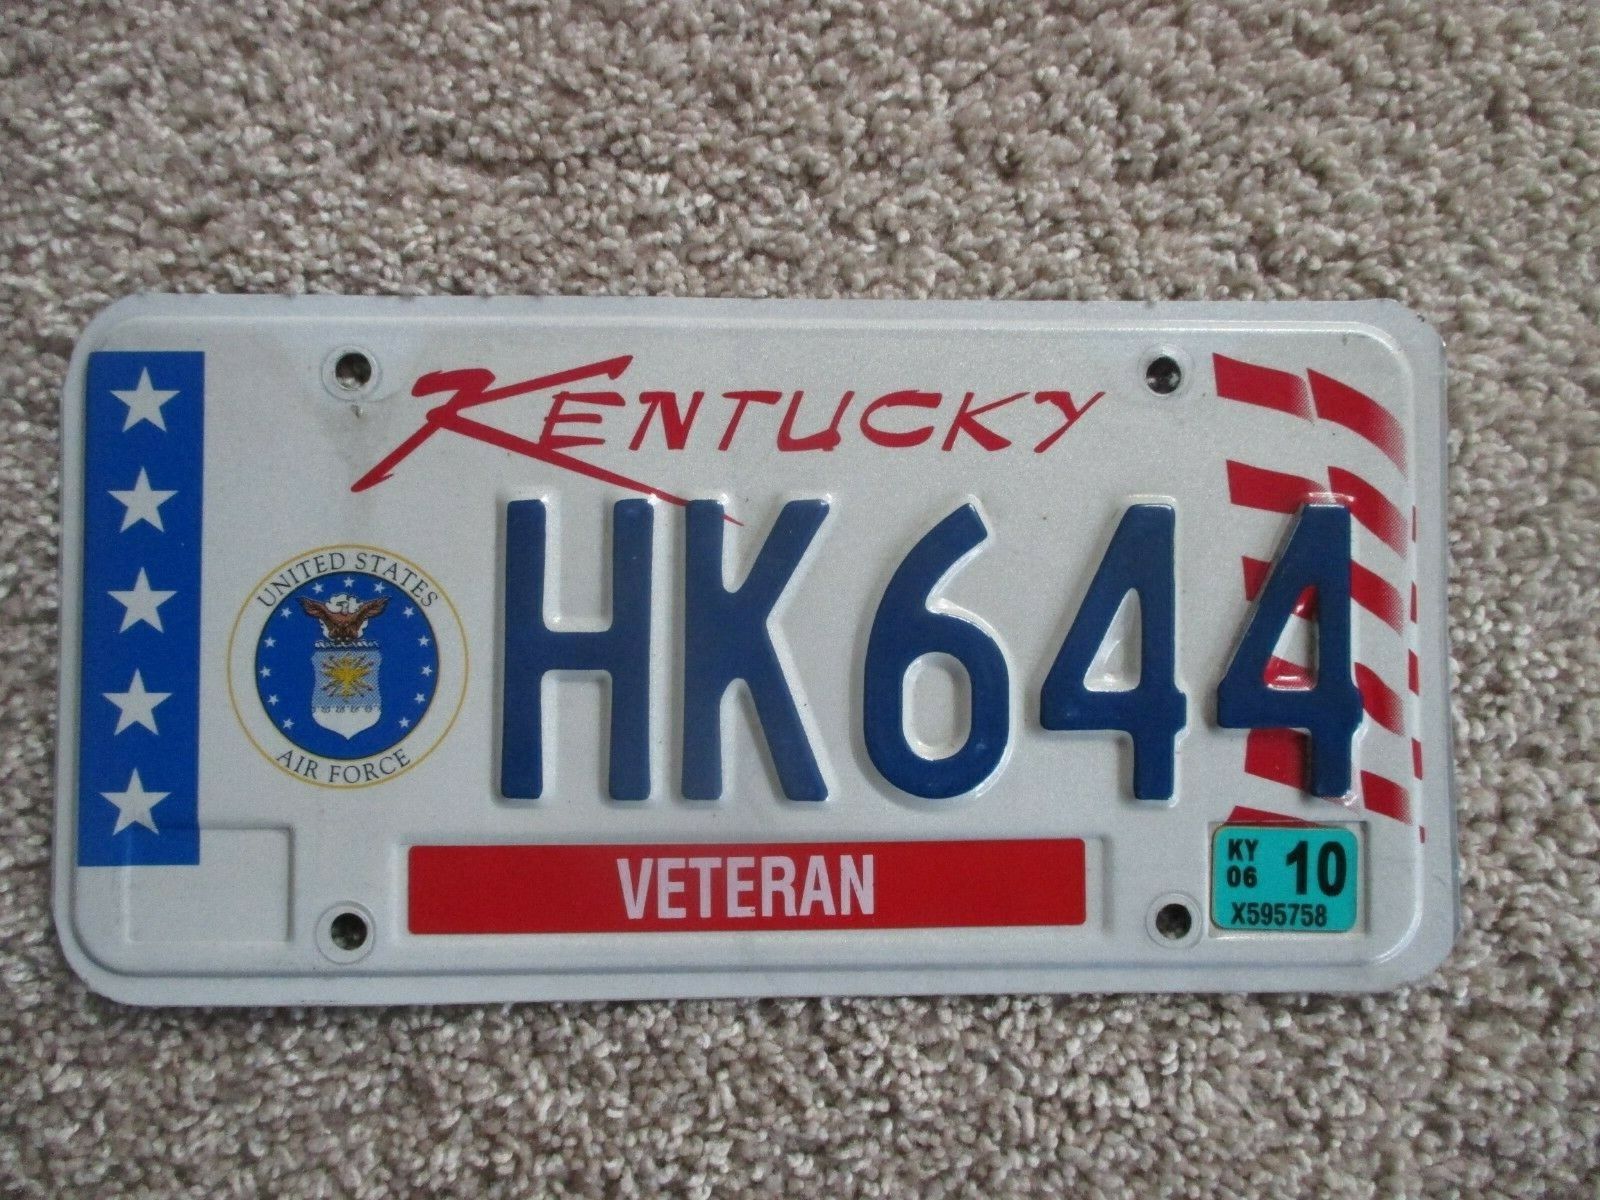 KENTUCKY: USA AIR FORCE ** VETERAN **  License / number plate  #HK644 2006 ISSUE